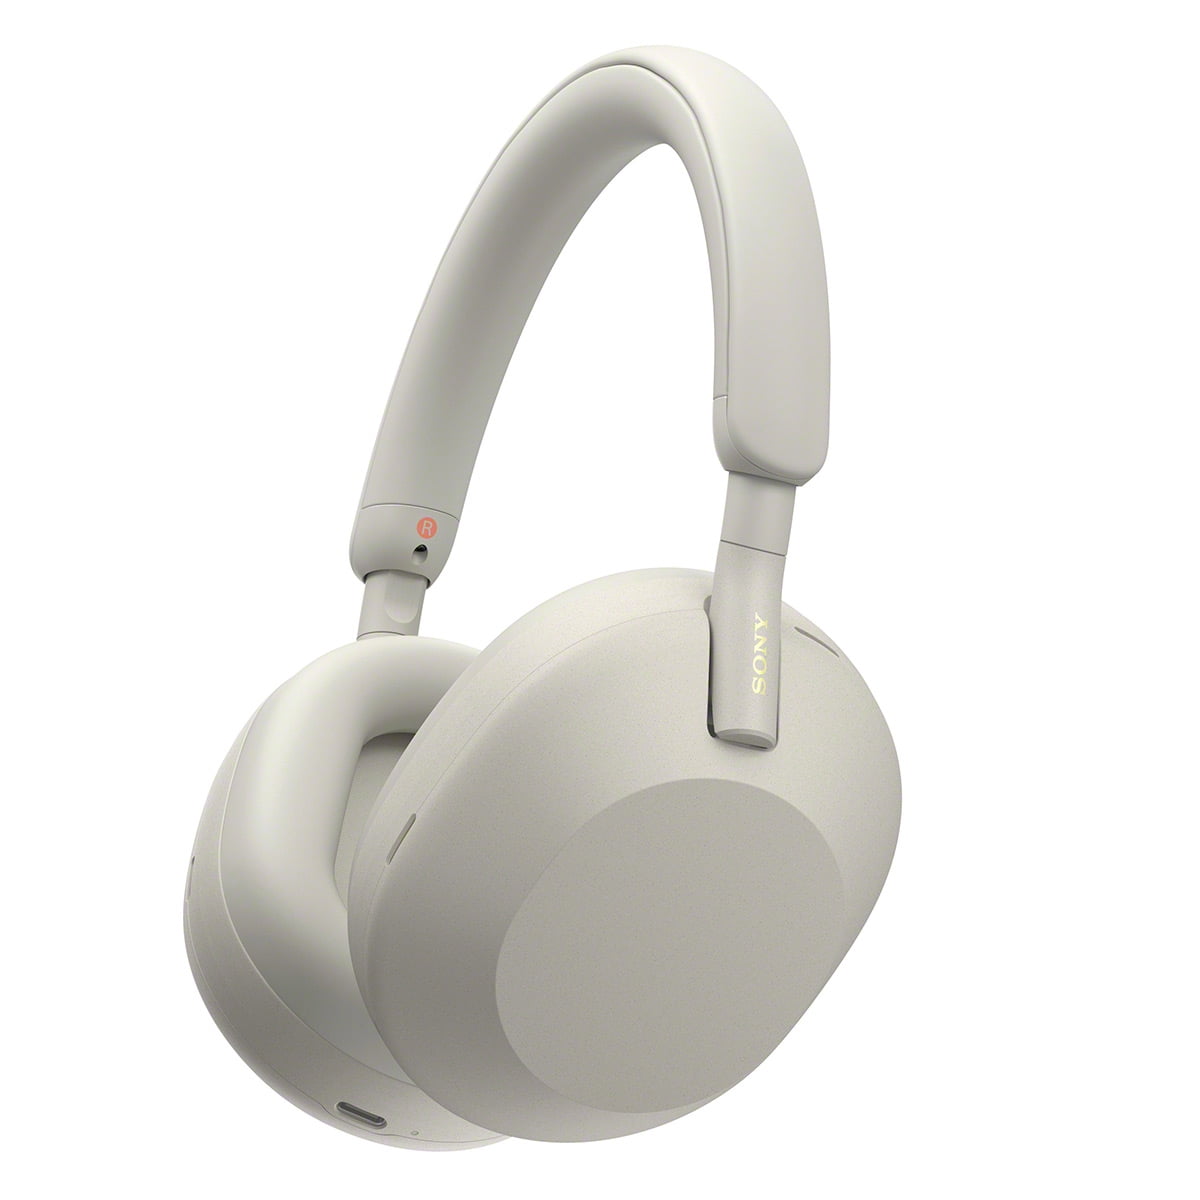 Sony's WH-1000XM5 headphones come with a new design, $50 price